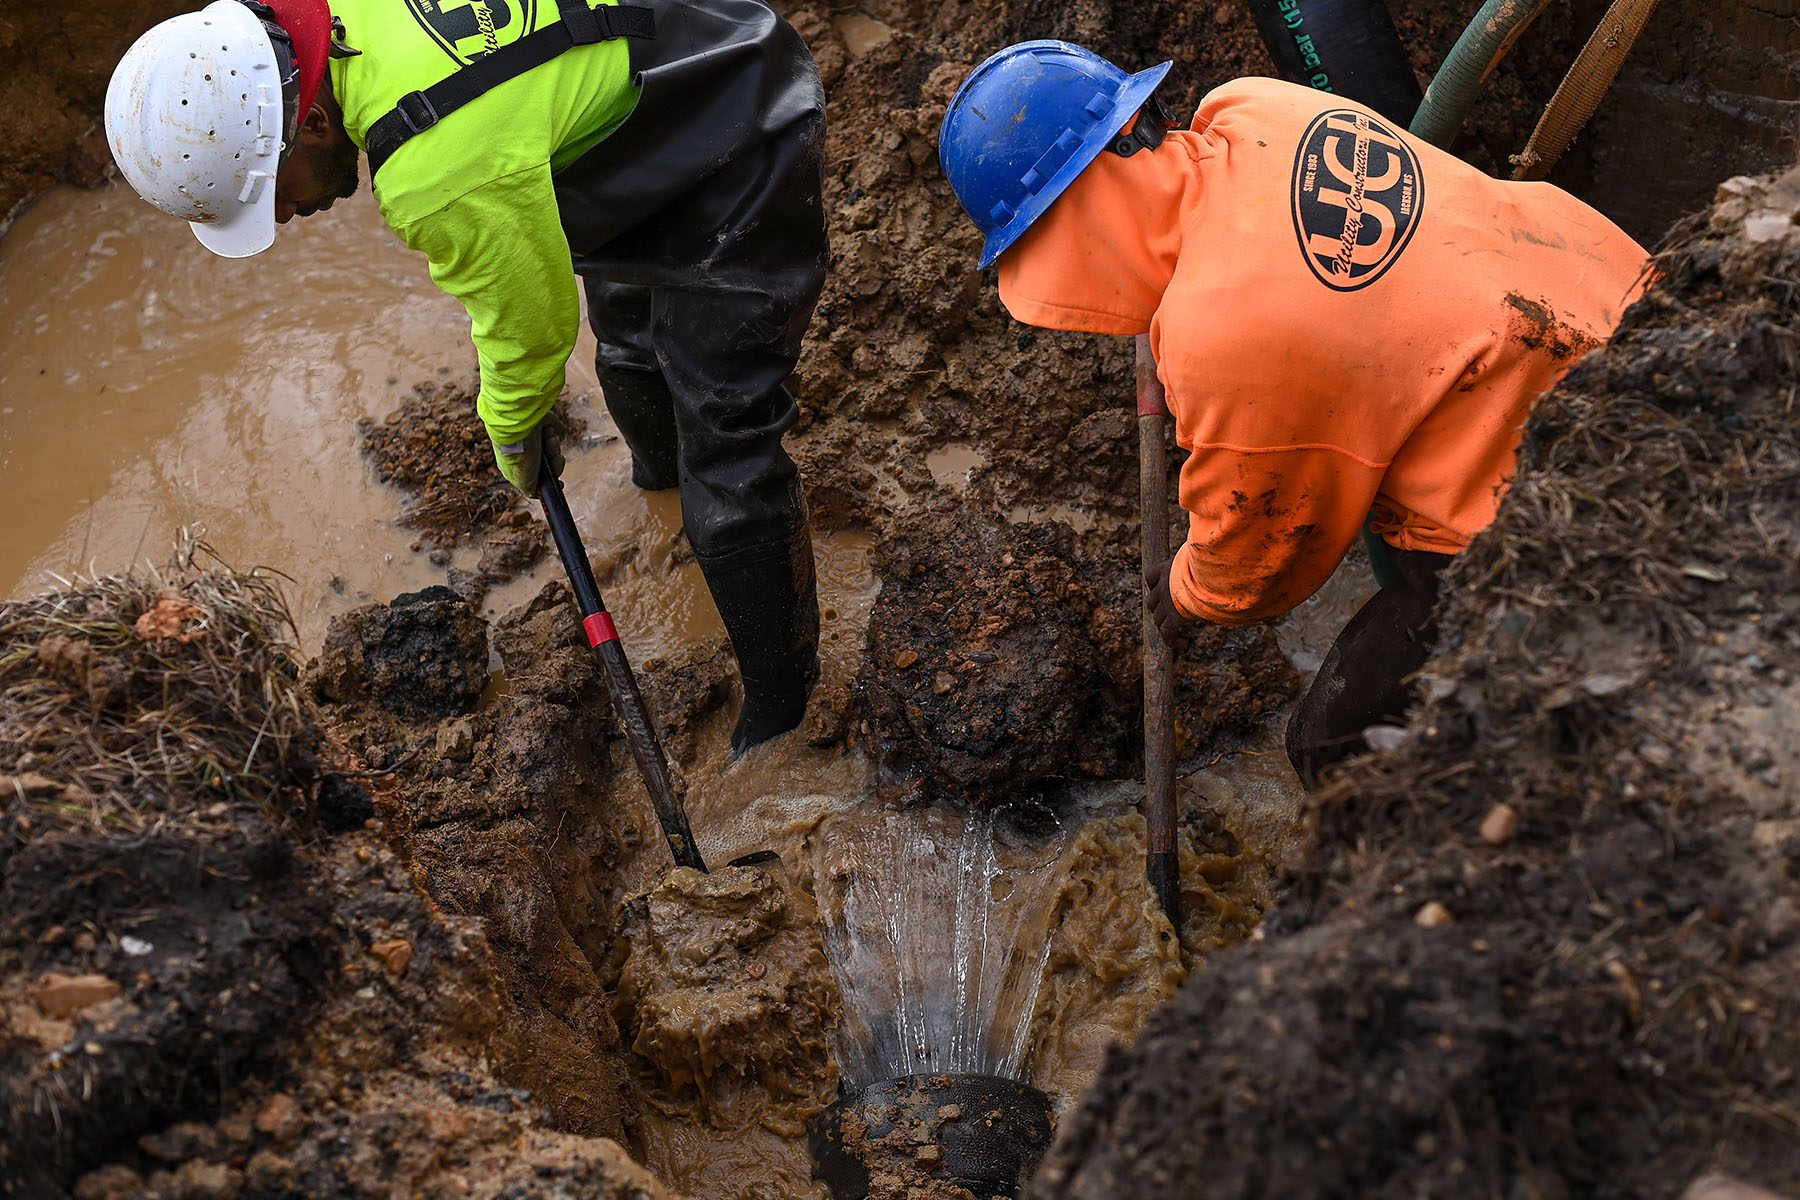 Workers shovel mud as they fix a damaged water main break along McLaurin Road in Jackson, Mississippi.